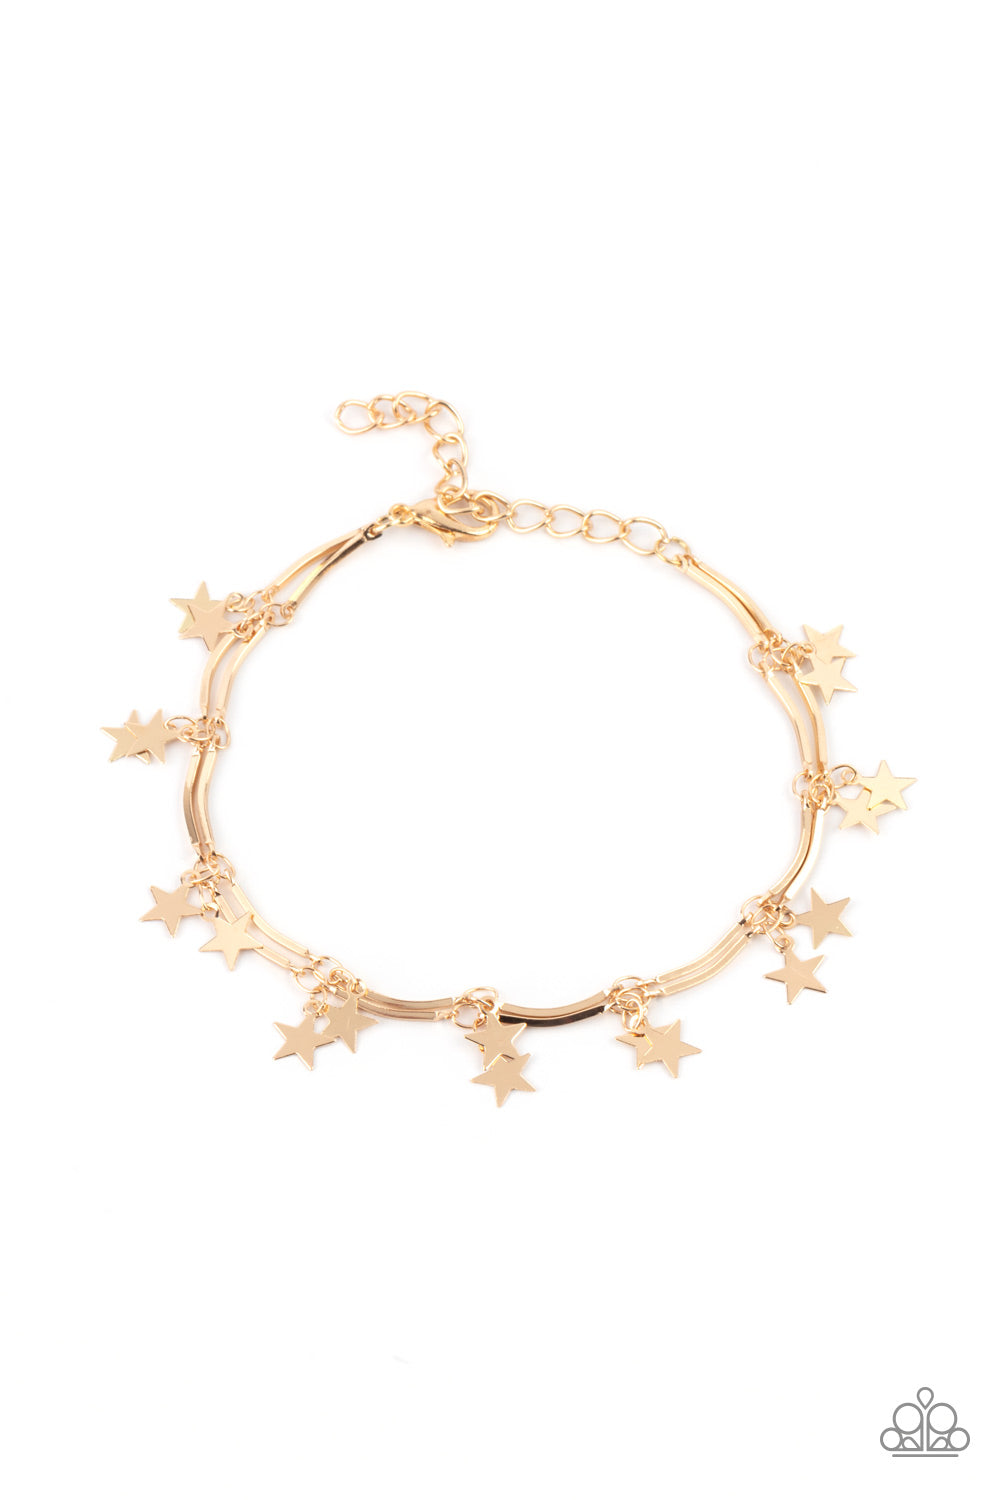 Party in the USA - Gold Bracelet Paparazzi Accessories. #P9DA-GDXX-171CG. Subscribe & Save!